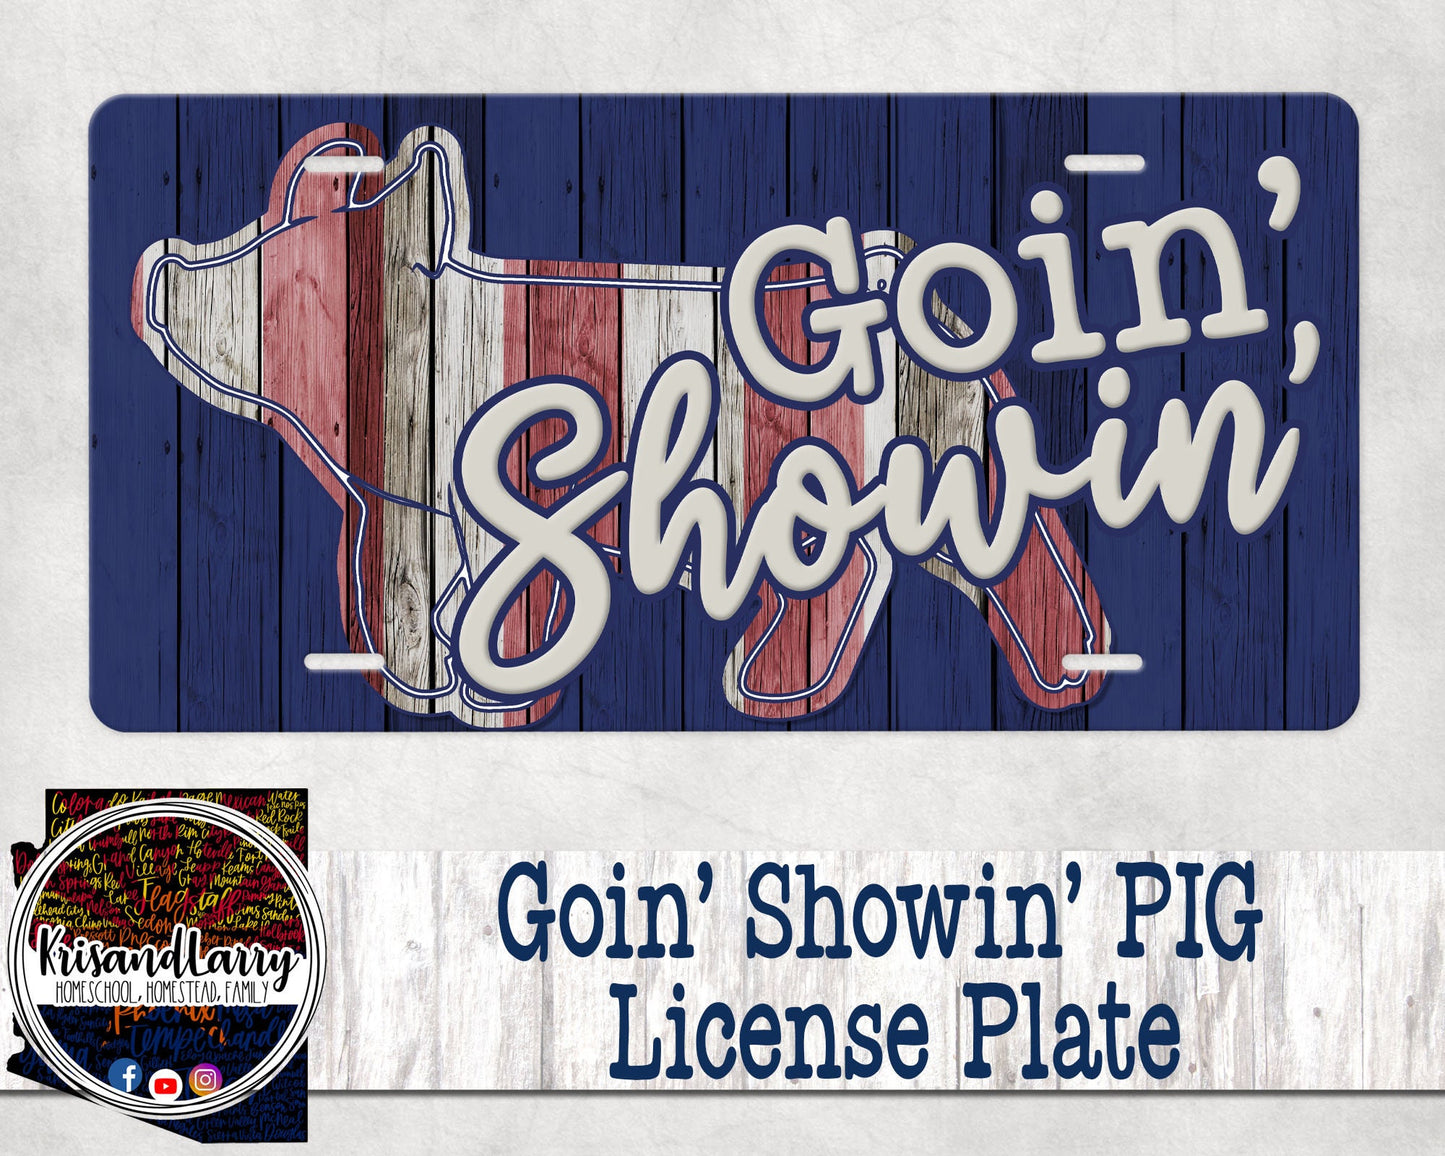 Goin' Showin' Red White and Blue American Pig, Hog, Swine Livestock License Plate,